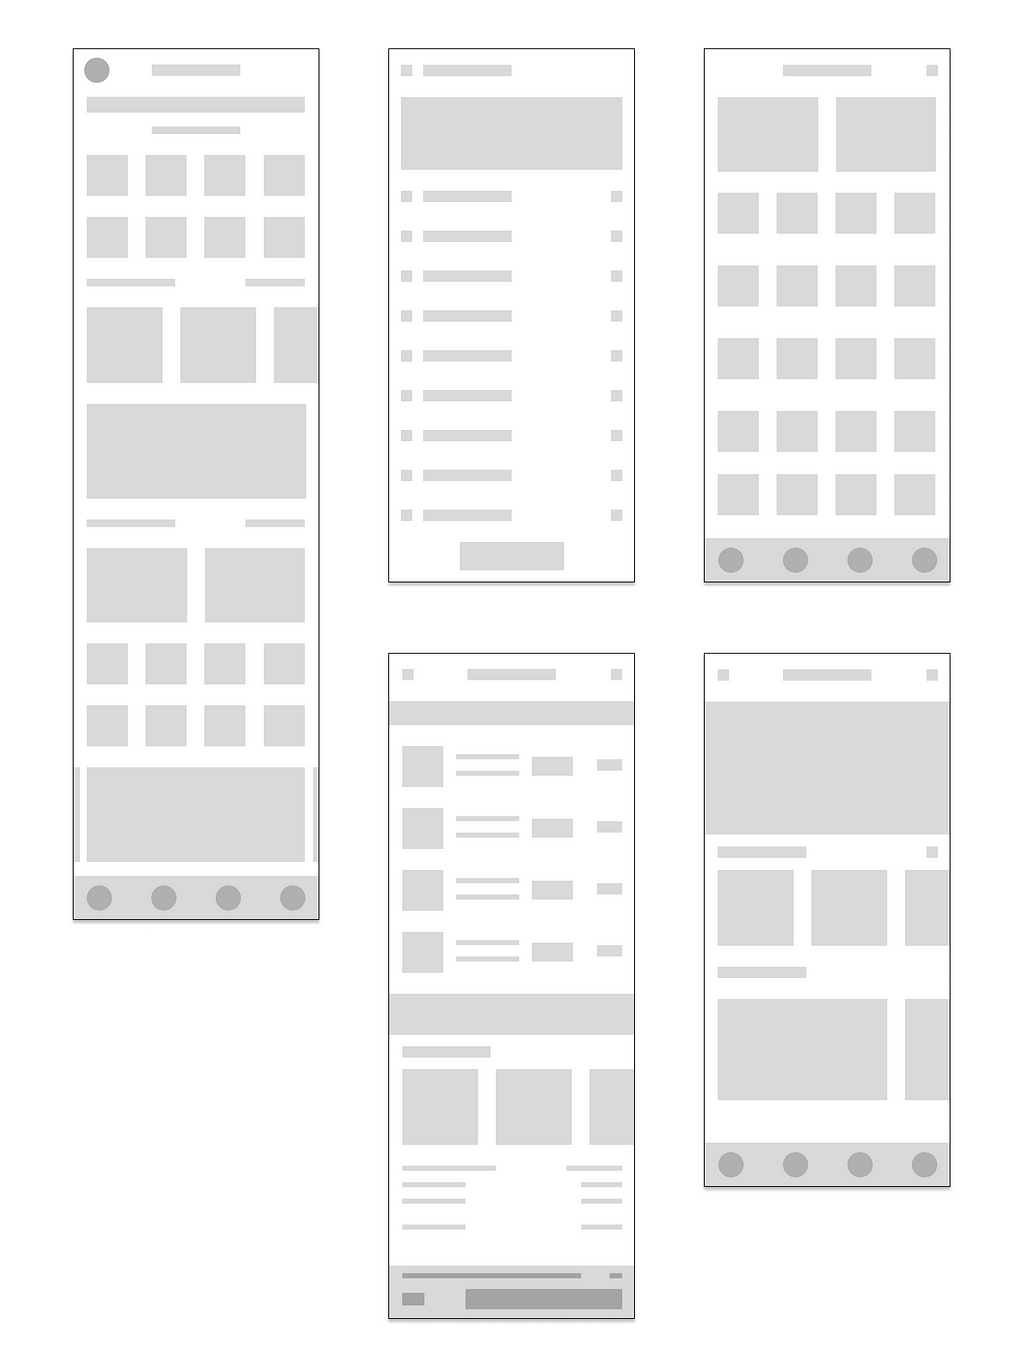 Low-fidelity wireframes of Elysium mobile app constructed during the initial phase of the project.